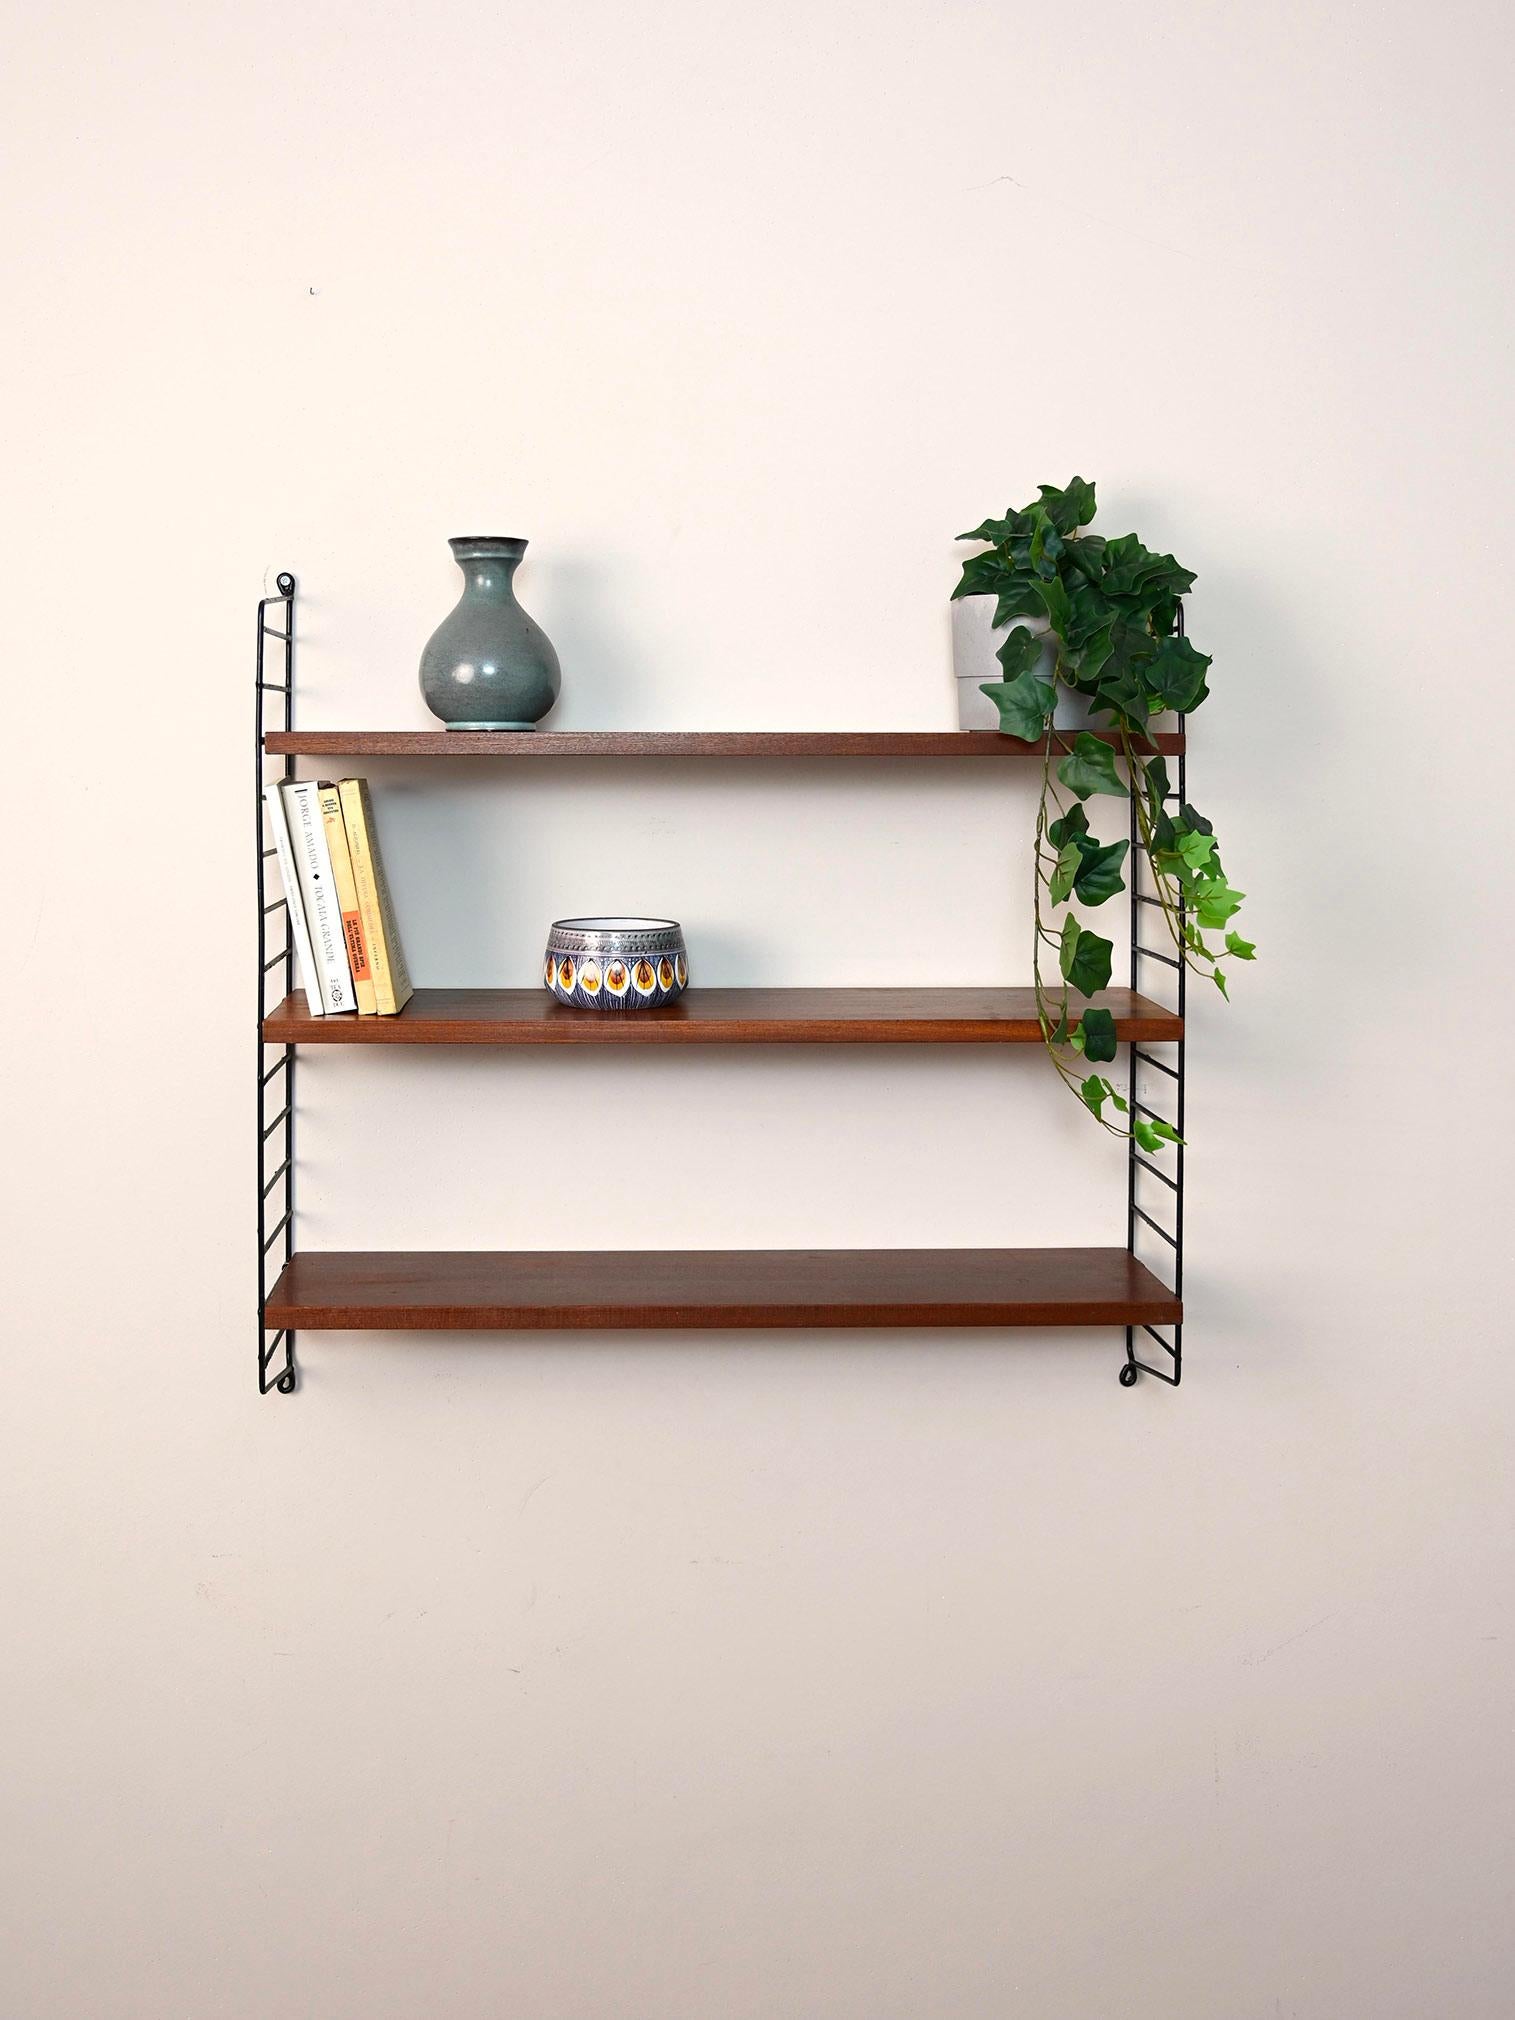 Original Scandinavian shelves from the 1960s.

This simple shelving system consists of a black metal side frame on which three mahogany shelves rest.
Simple and functional it can be hung in different rooms of the house.

Good condition. A